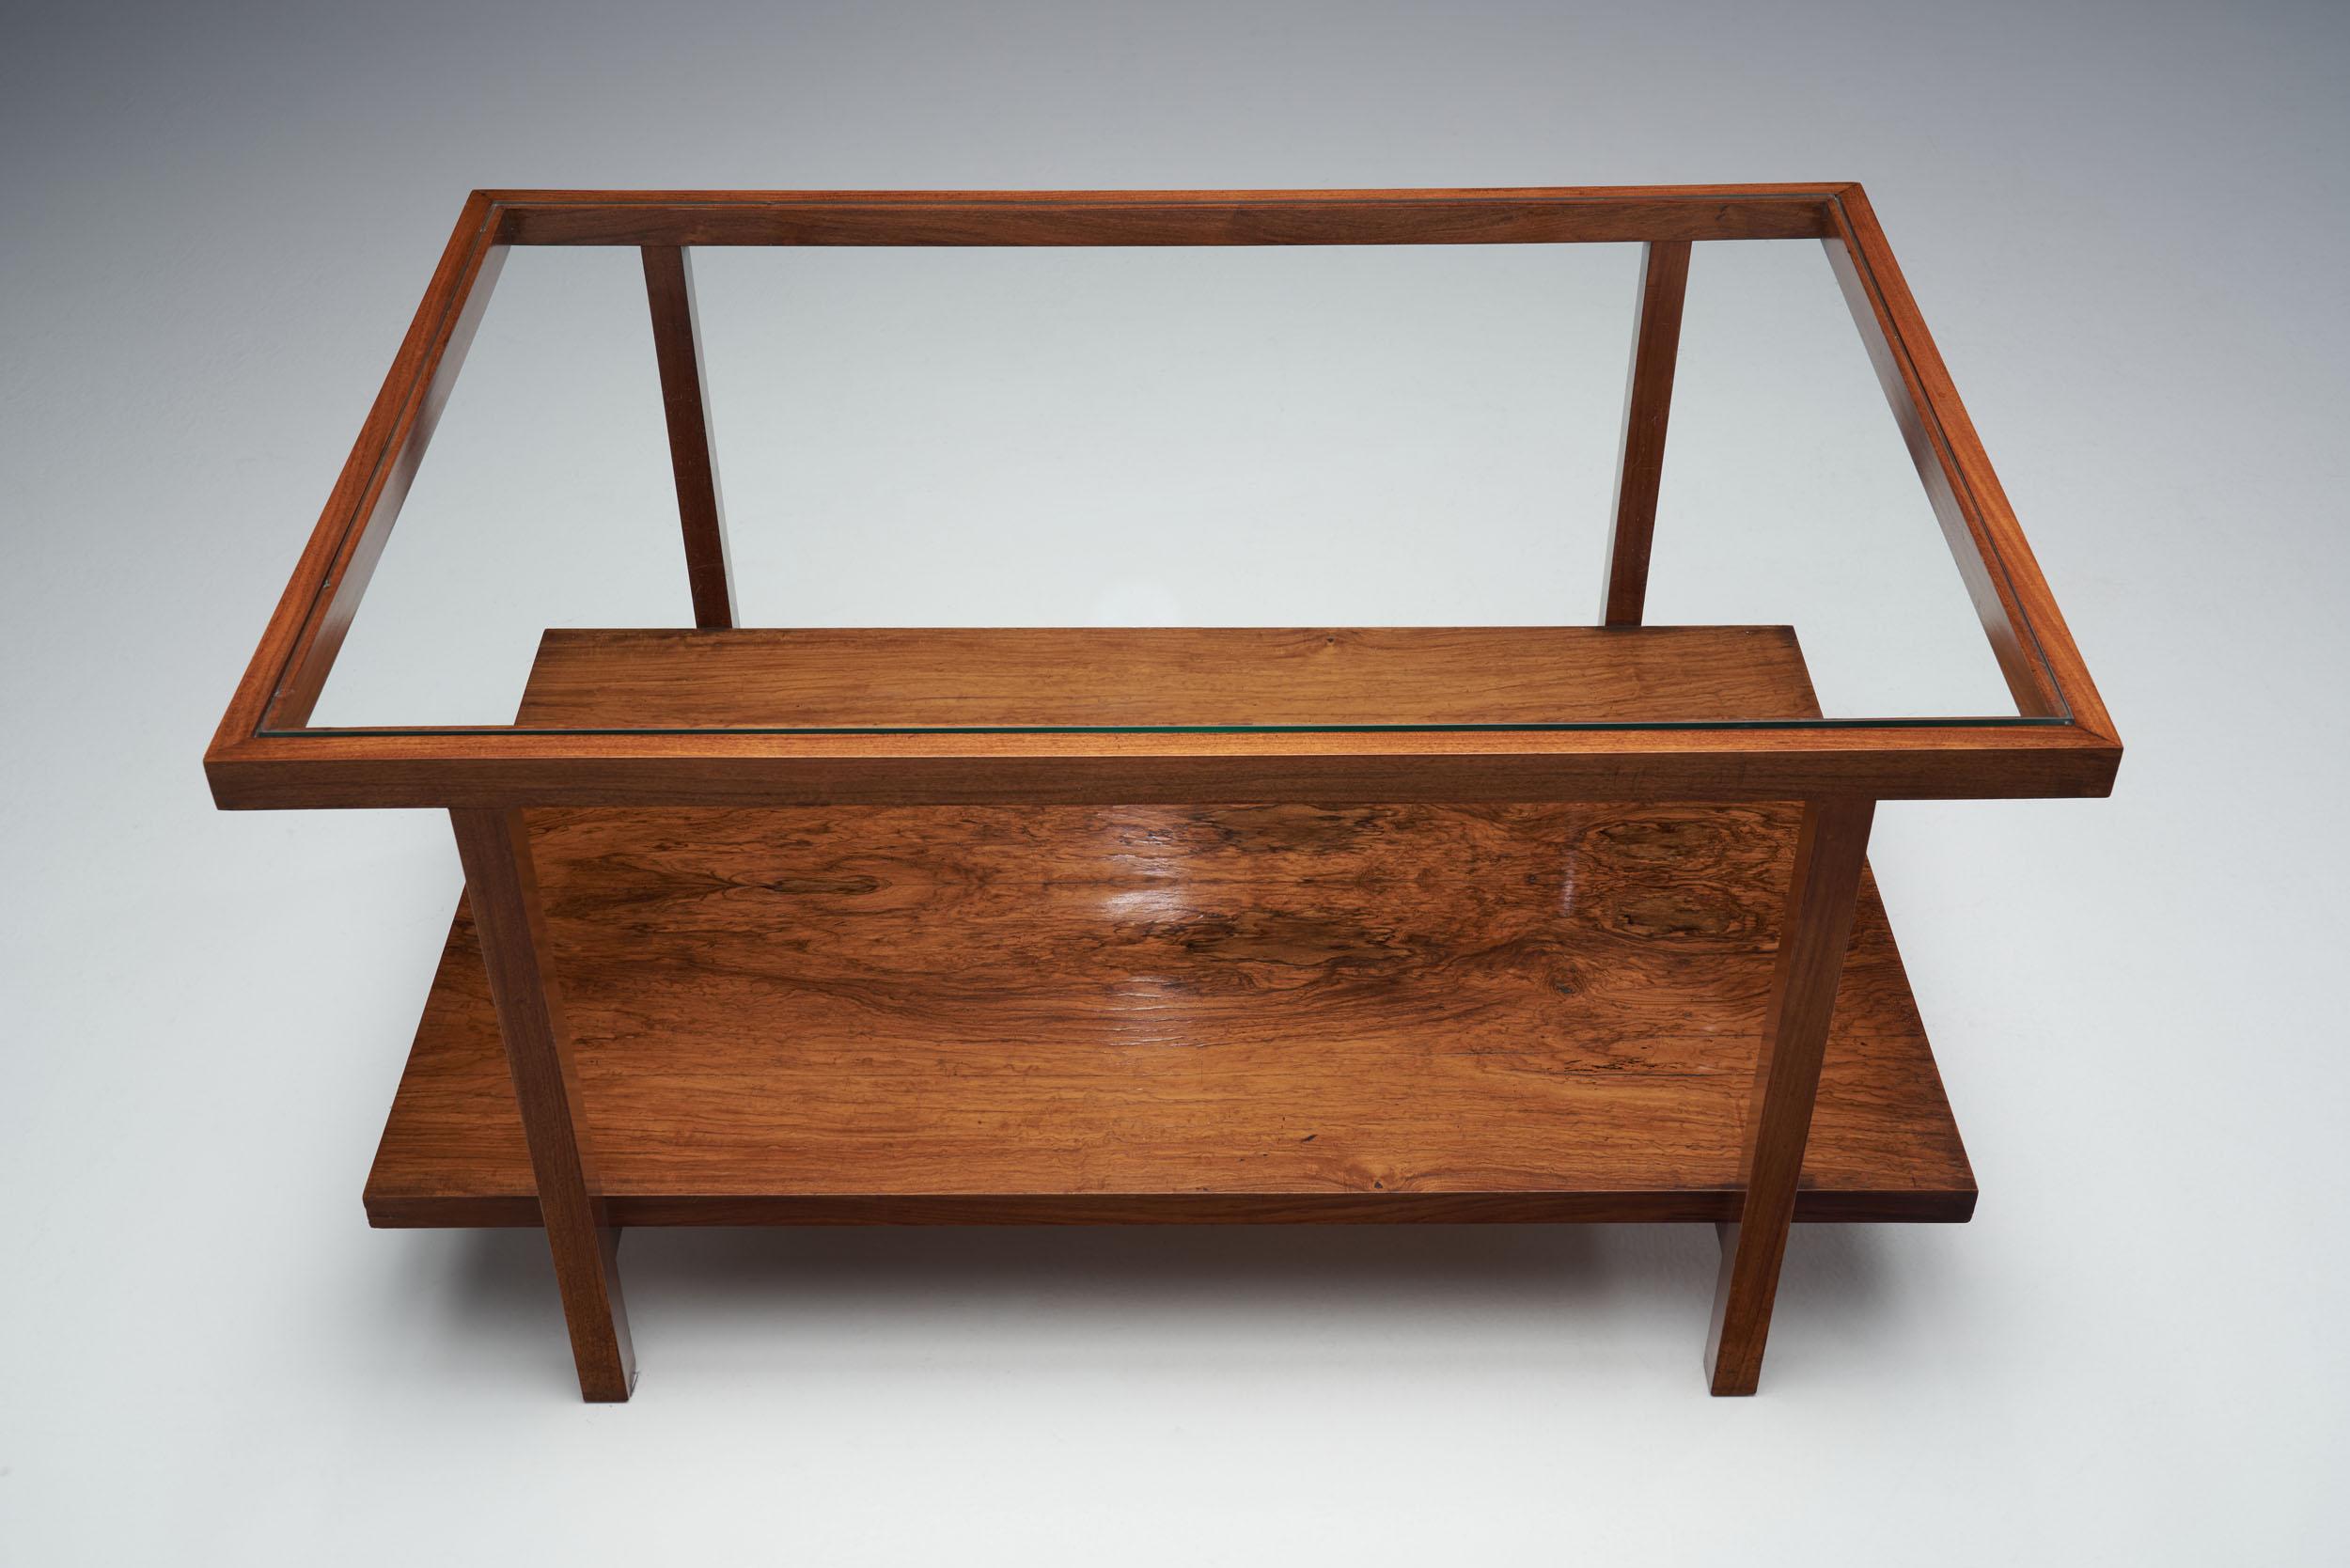 Rectangular Branco and Preto Wooden Coffee Table, Brazil, 1960s For Sale 1